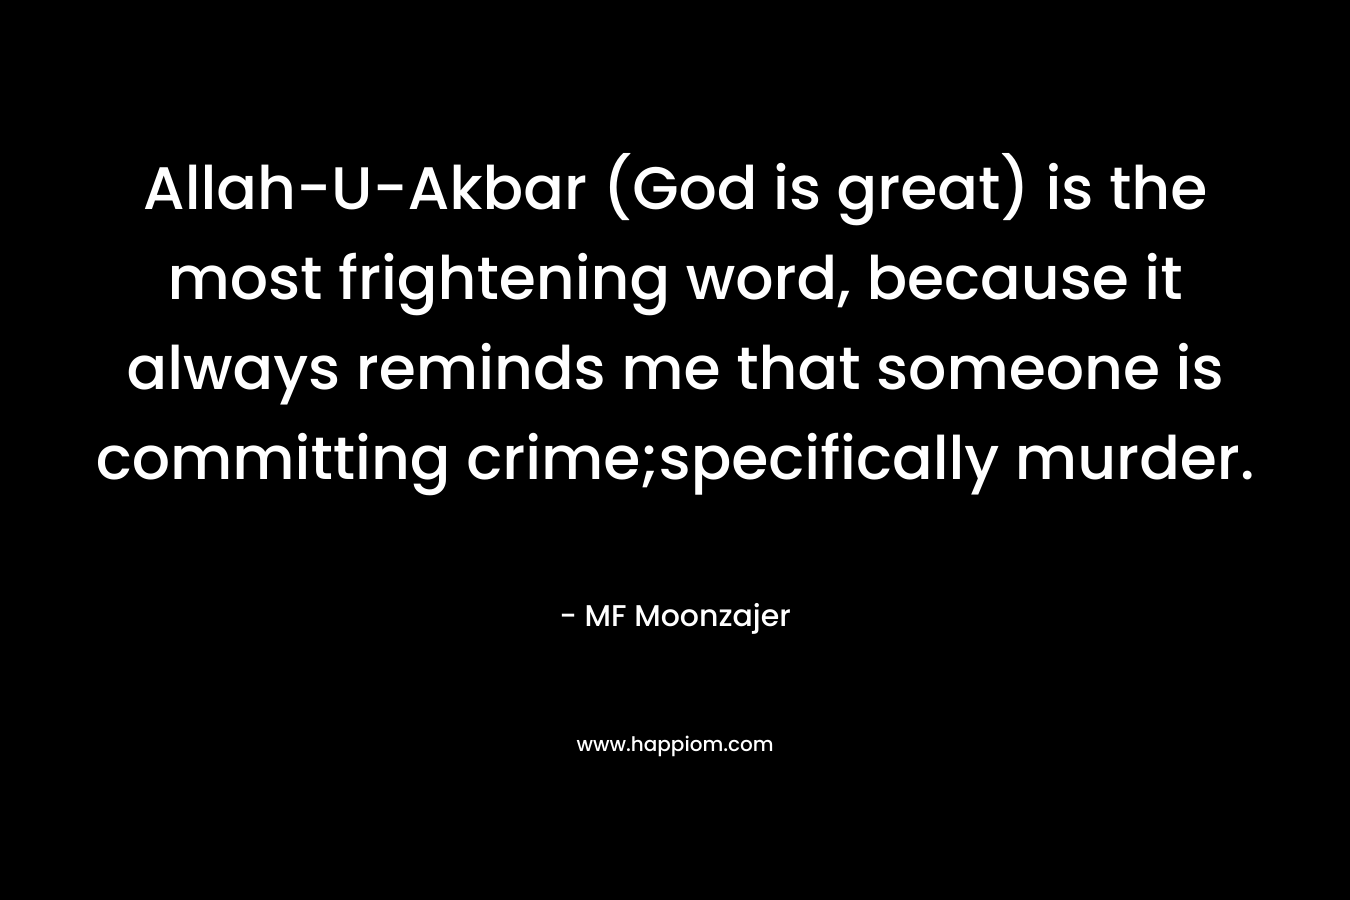 Allah-U-Akbar (God is great) is the most frightening word, because it always reminds me that someone is committing crime;specifically murder.